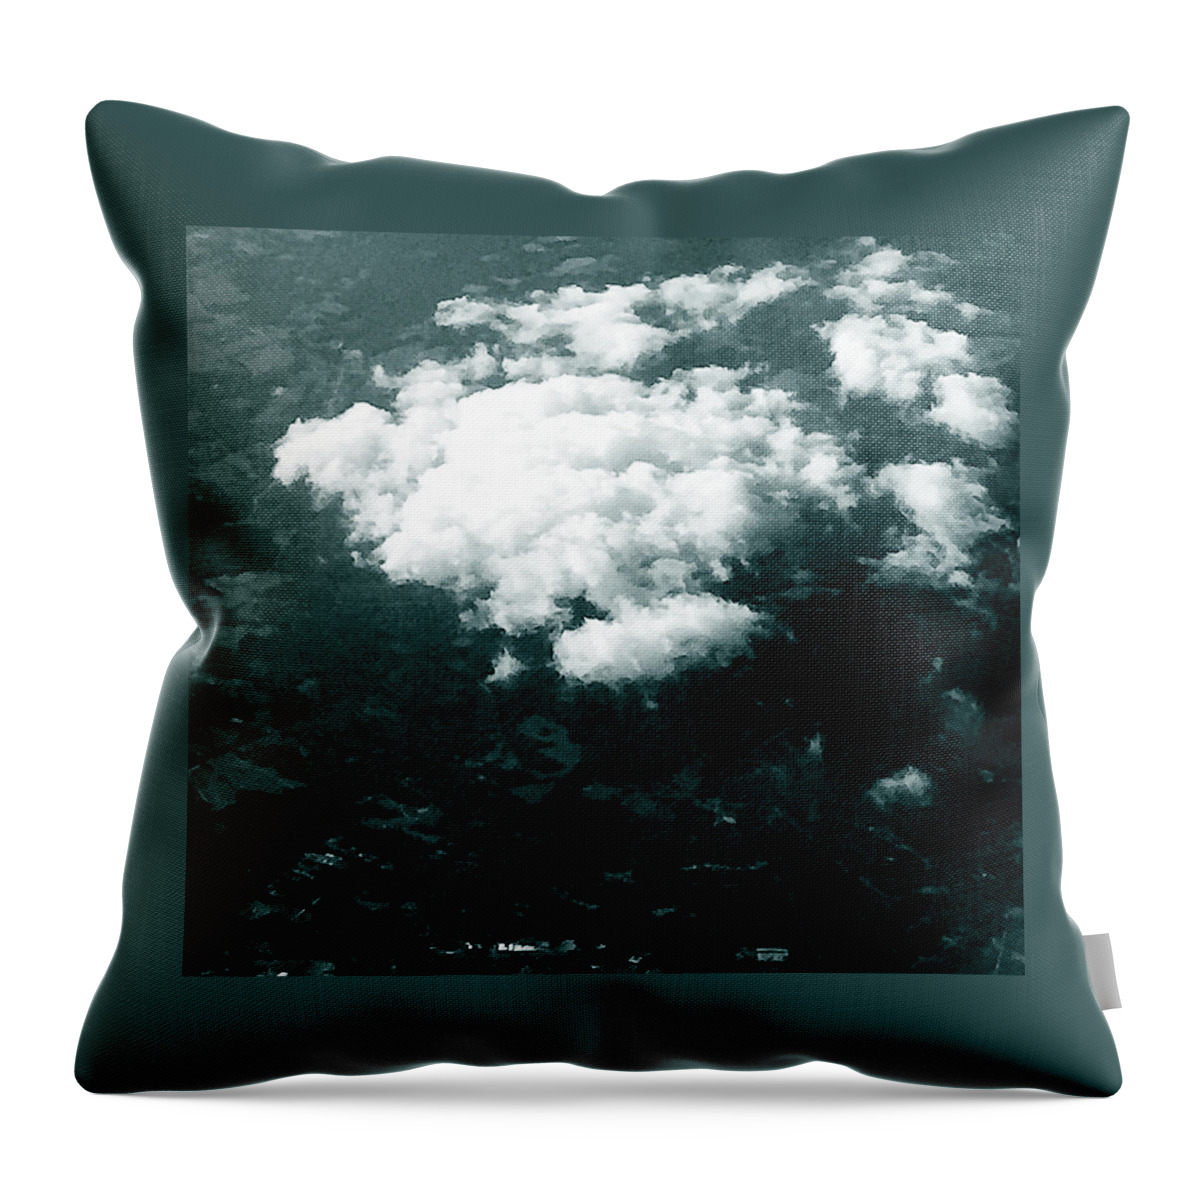 Tantilizing Cumulus Clouds Throw Pillow featuring the photograph Cotton Soft by Trevor A Smith